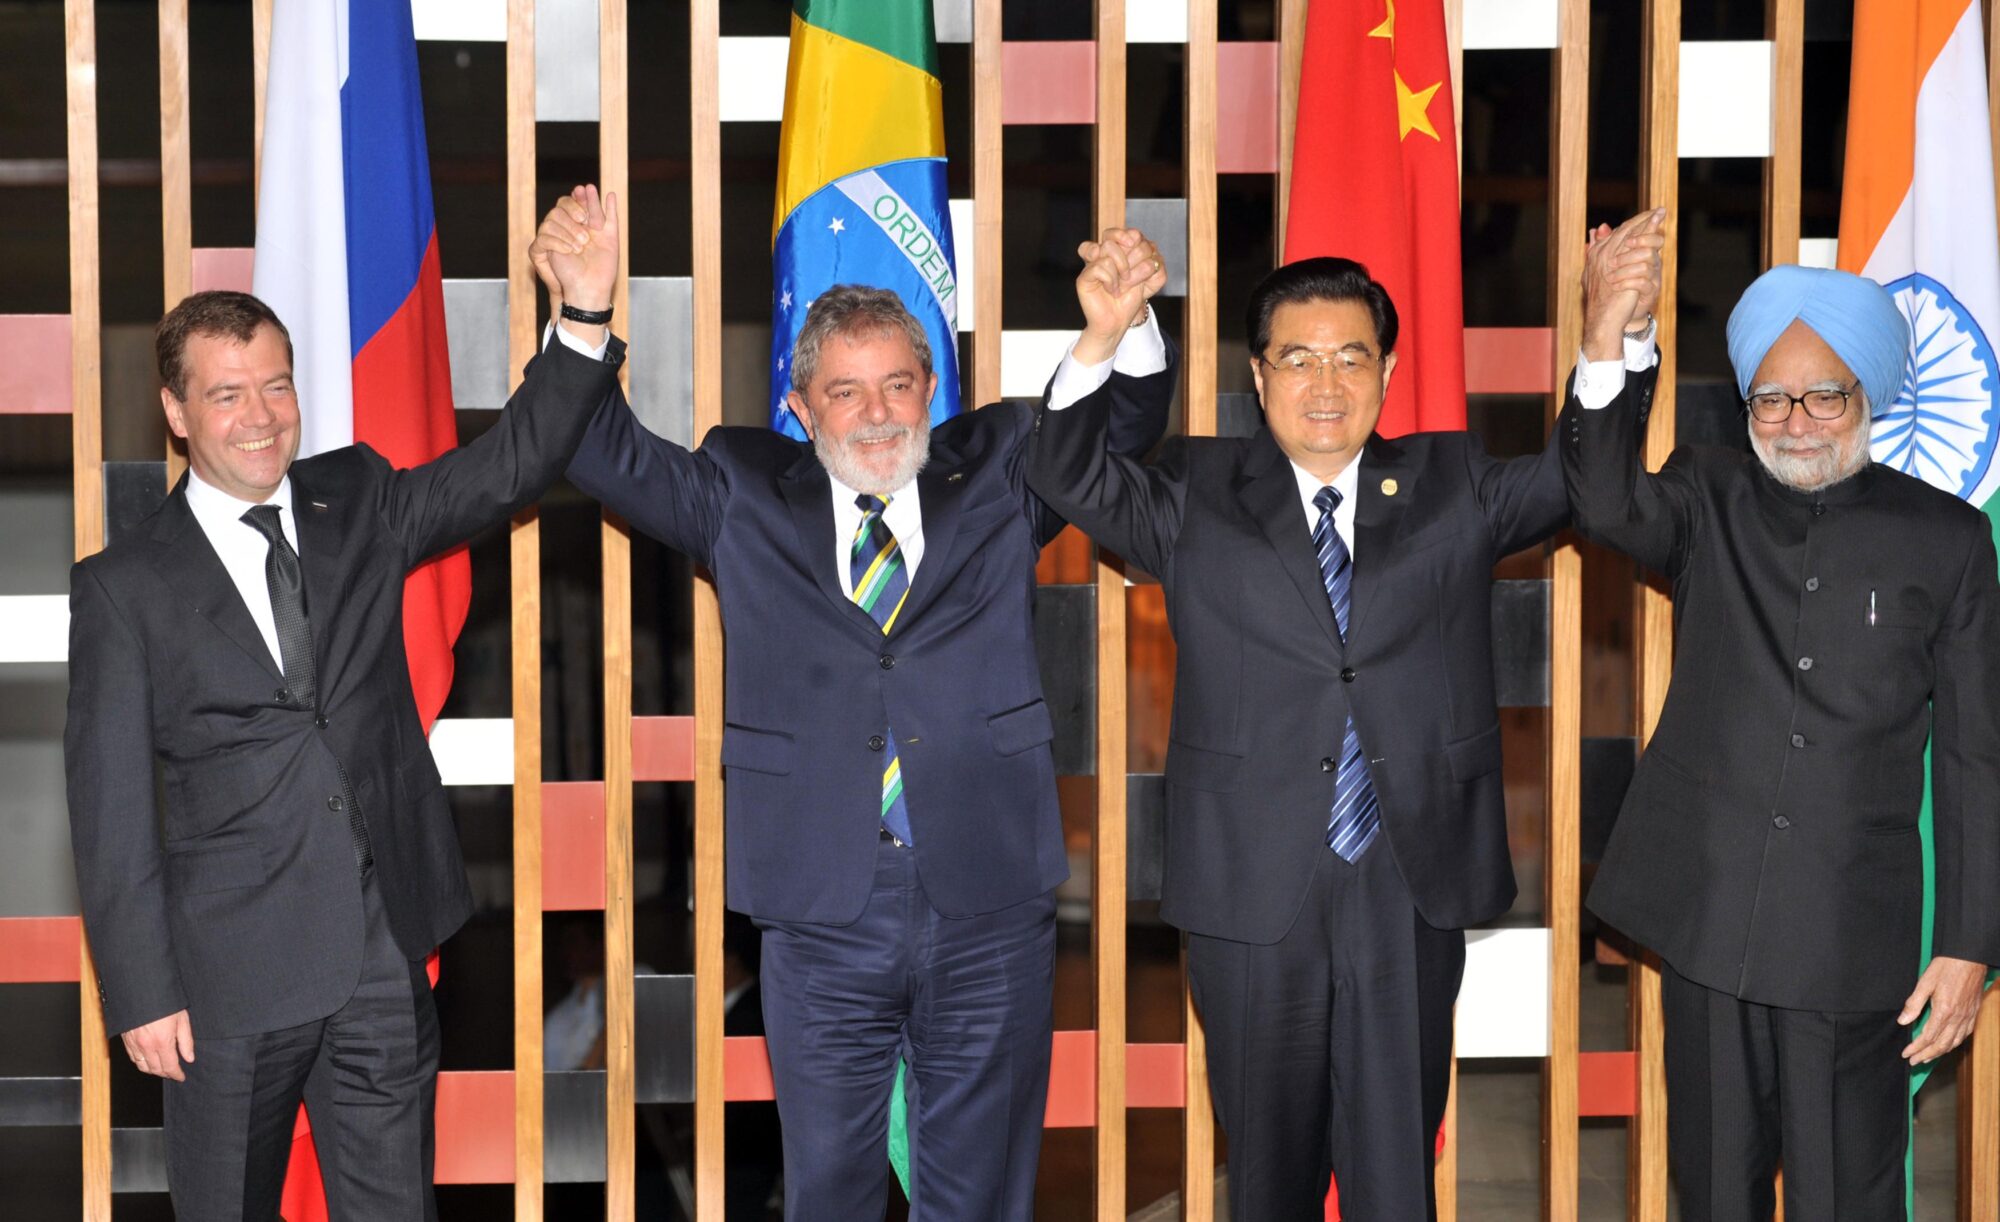 President Dmitry Medvedev (Russia), Lula (Brazil), Hu Jintao (China) and Indian Prime Minister Manmohan Singh holding hands